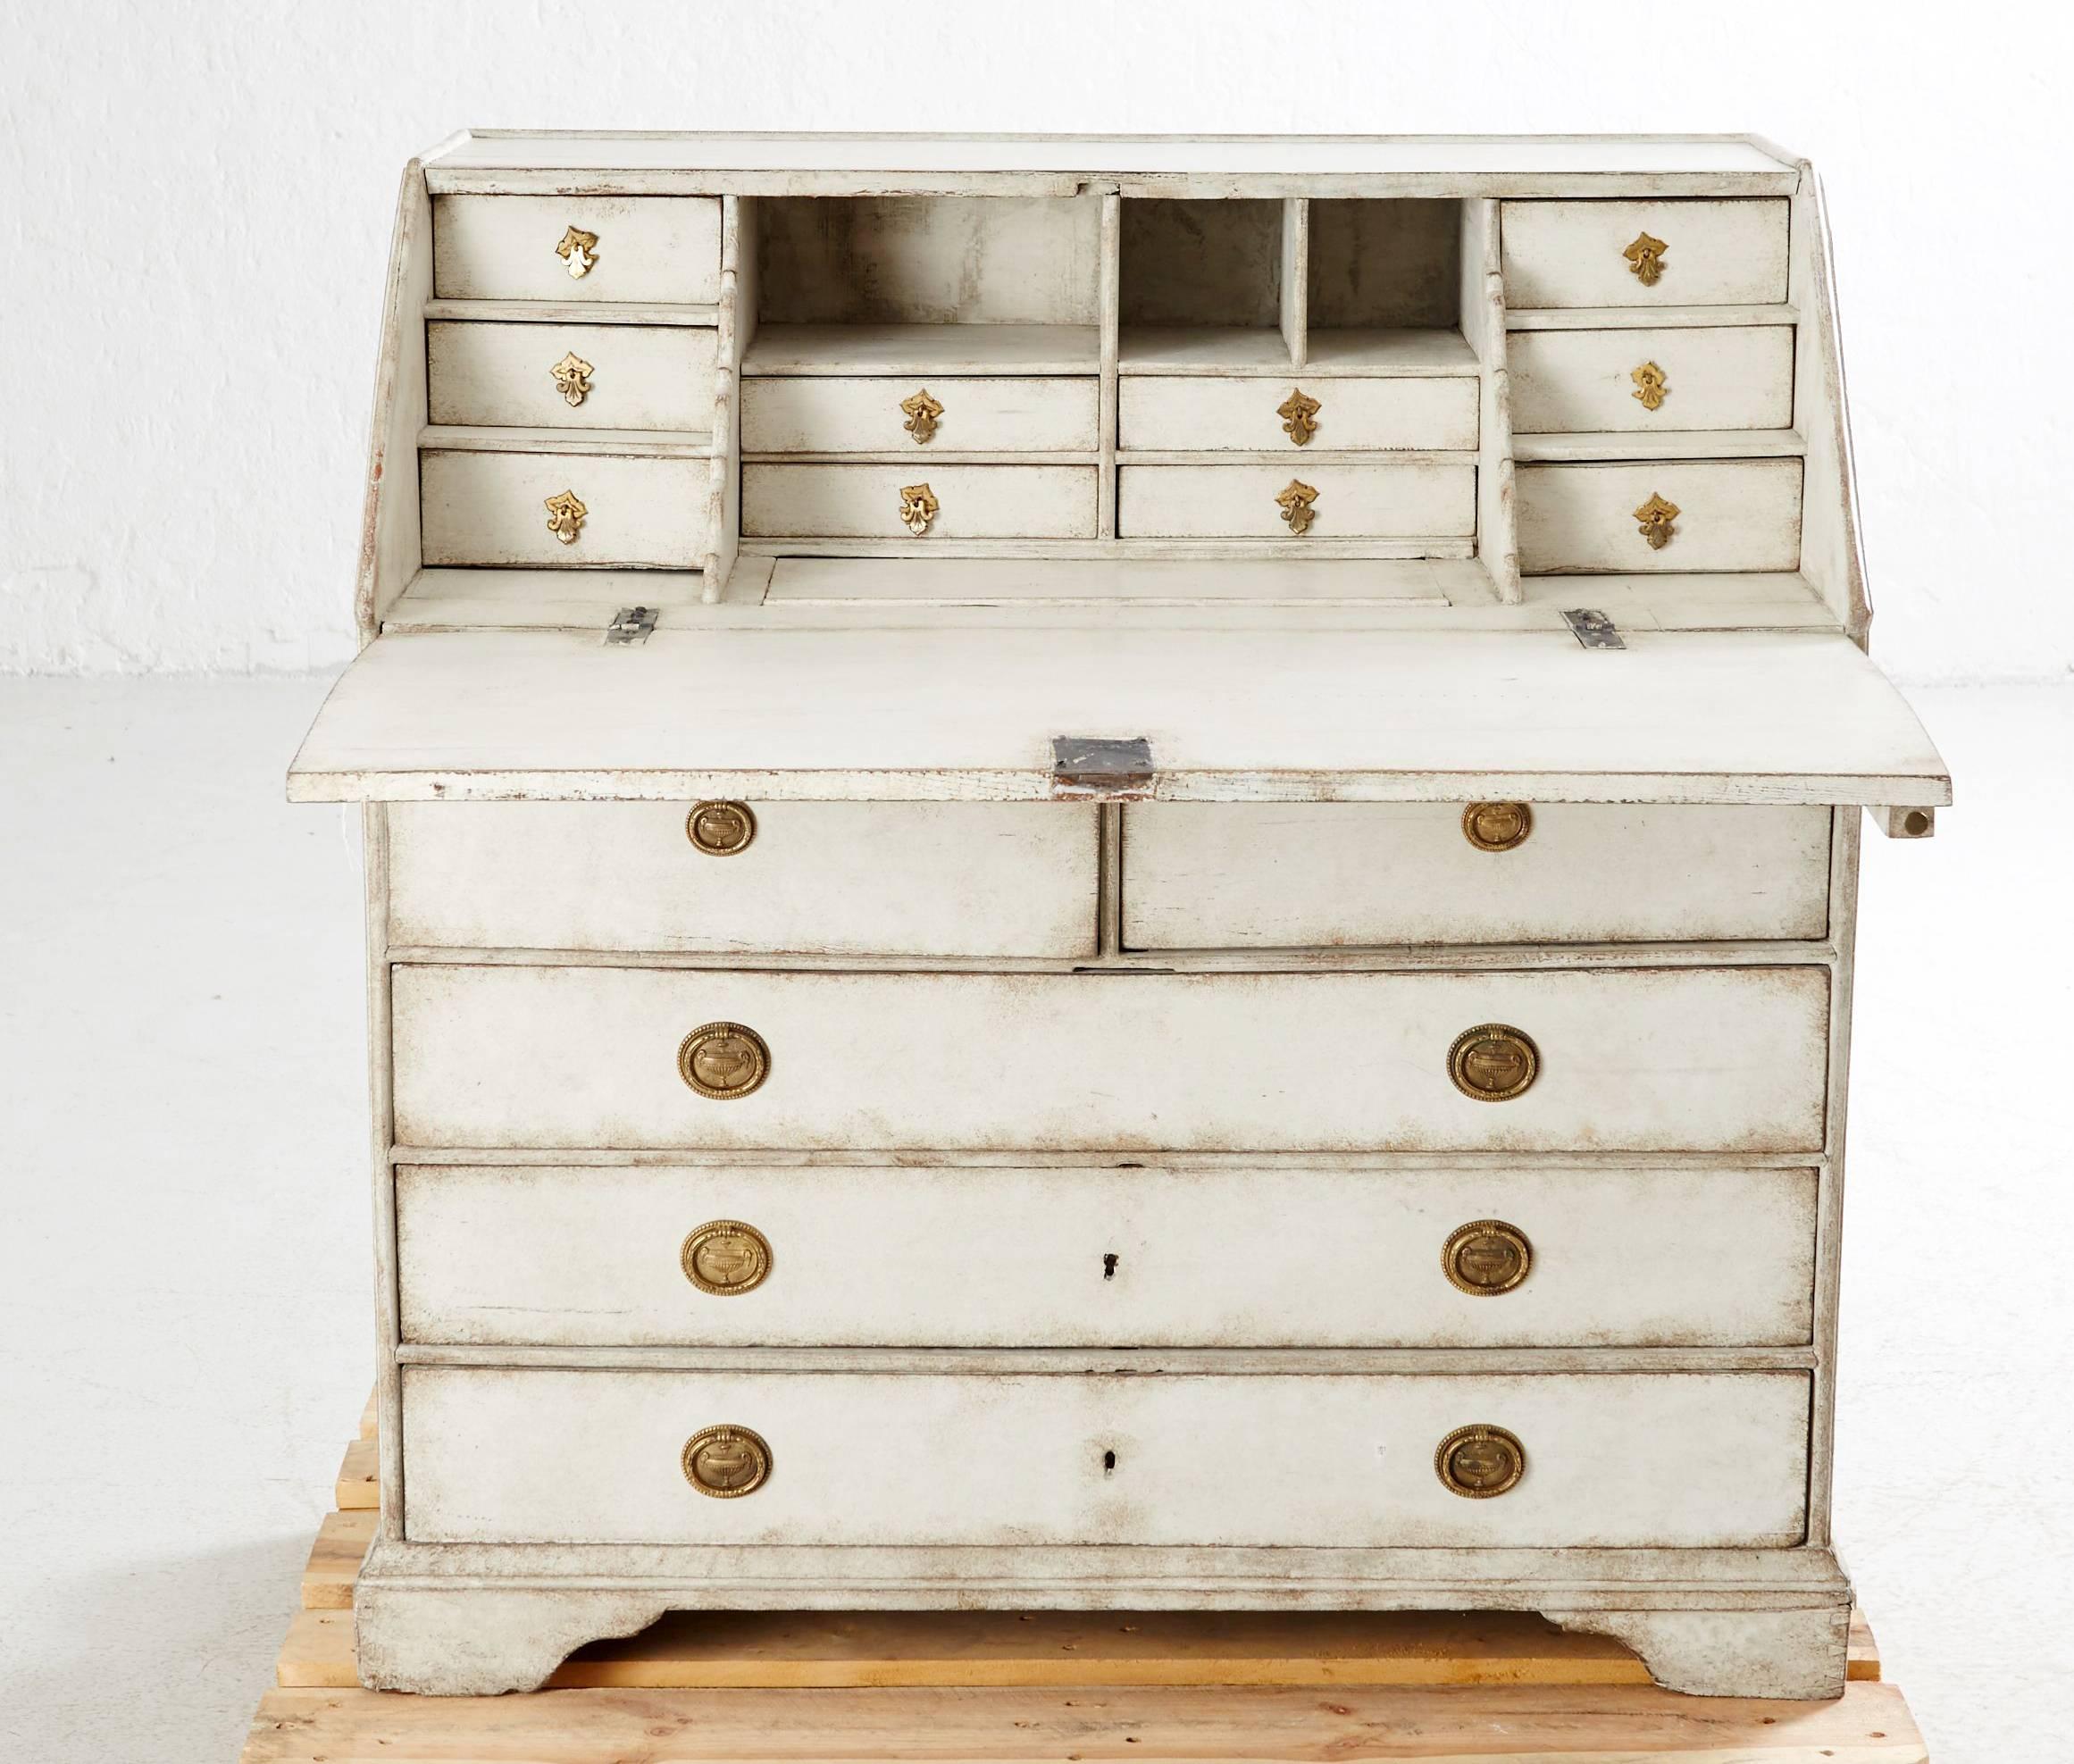 18th century Swedish secretaire or bureau with five drawers in the front and secret compartments. Old paint and hardware.